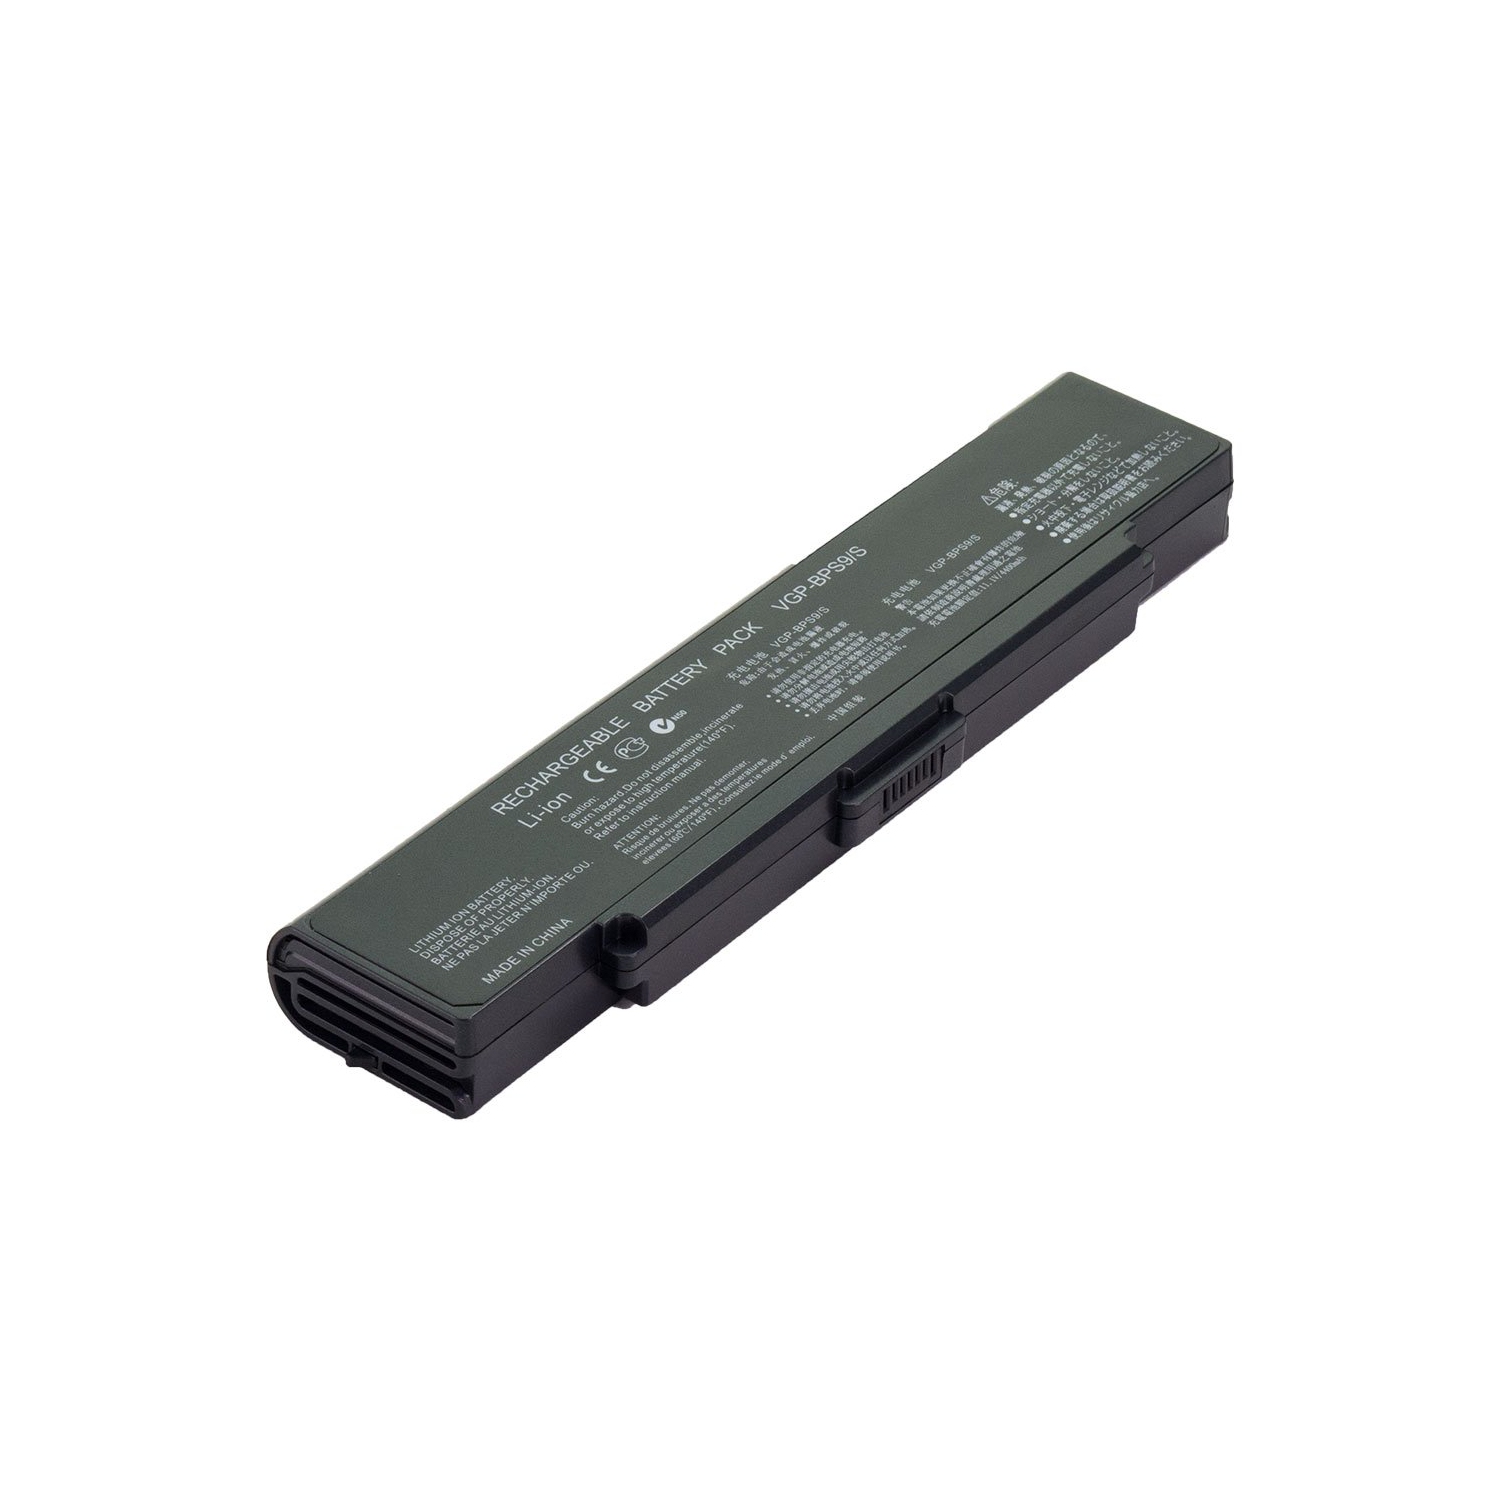 Laptop Battery Replacement for Sony VAIO VGN-NR498E/P, VGP-BPL10, VGP-BPS10/B, VGP-BPS10B, VGP-BPS9/B, VGP-BPS9A/S